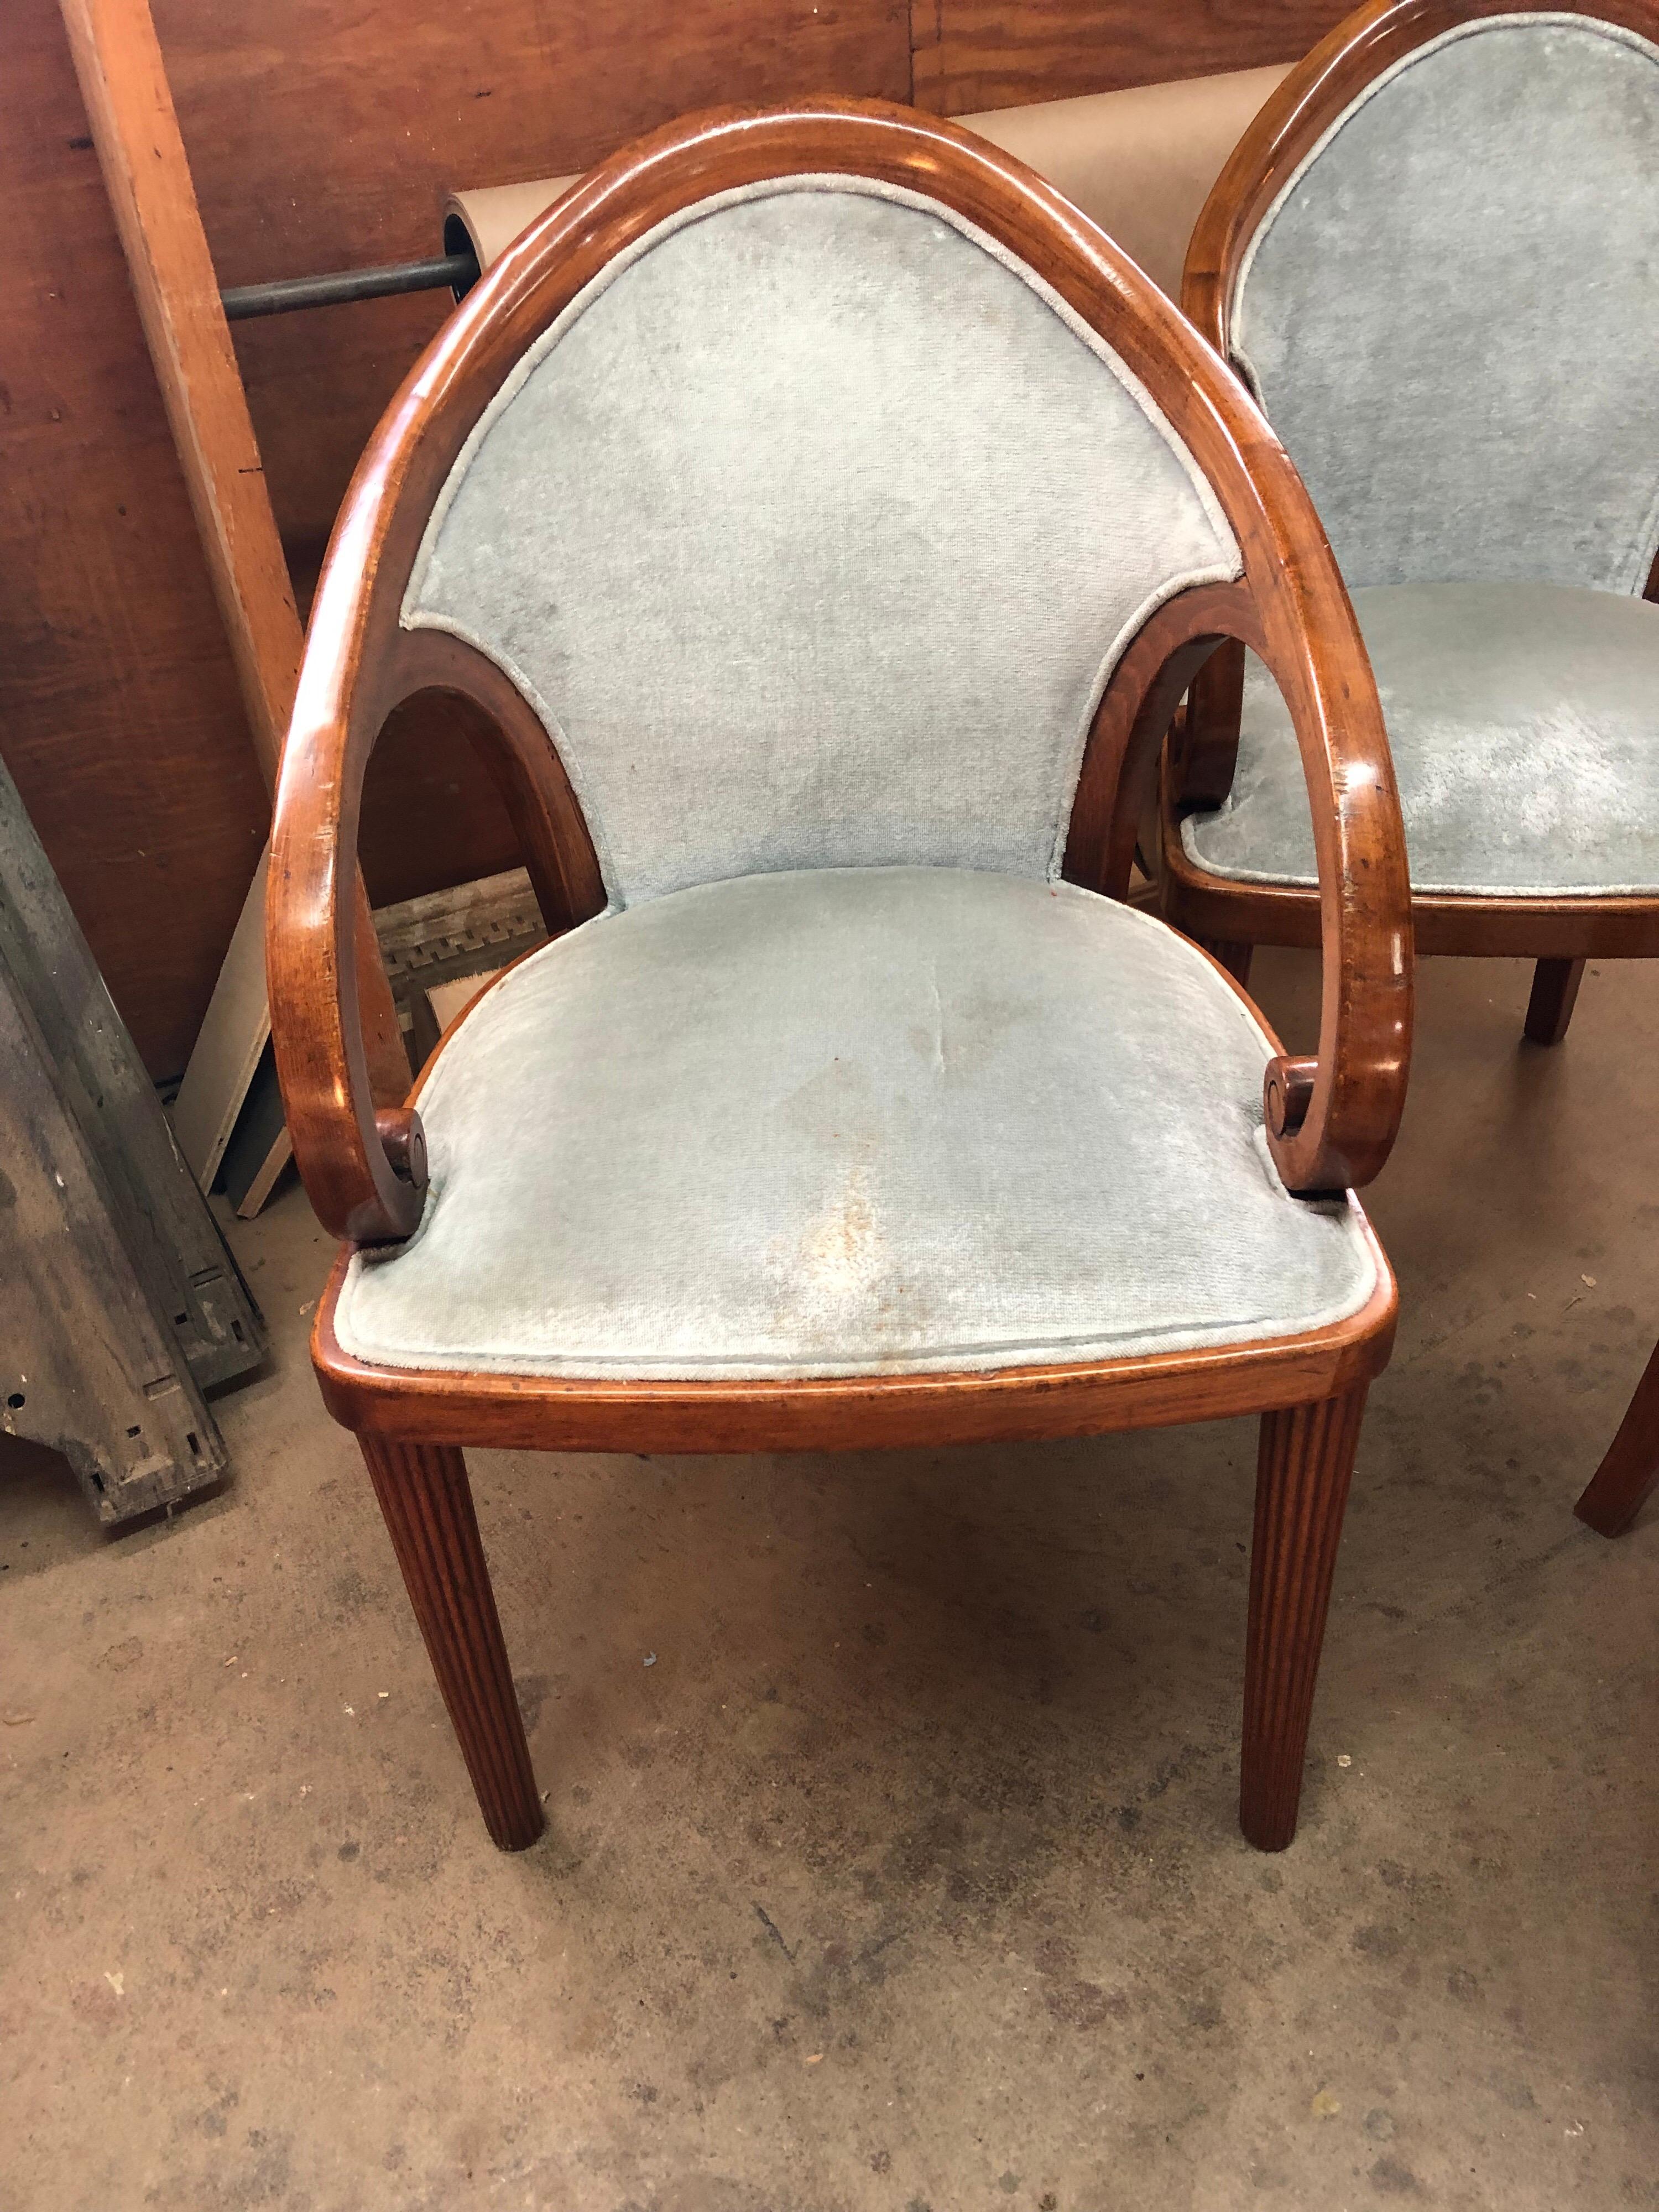 A set of four Austrian walnut upholstered dining chairs. Blue-gray velvet upholstery.
There are also a pair (2) matching chairs also available in addition to these four. They are mahogany, but exact same chair. Upholstered seat and back.